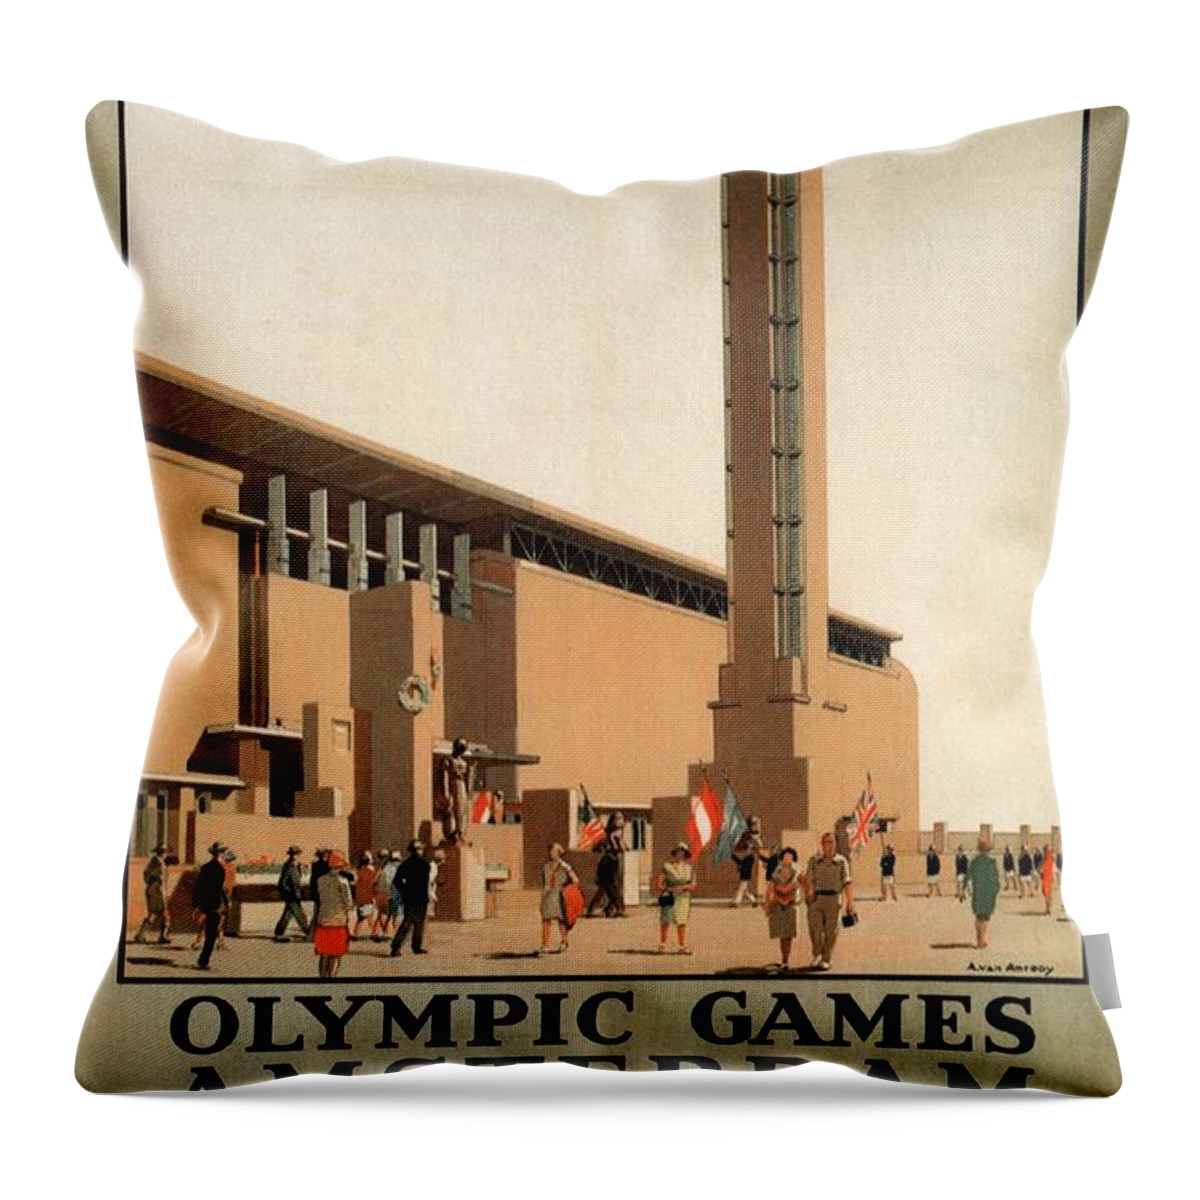 Olympic Games Throw Pillow featuring the mixed media Olympic Games, Amsterdam, Netherlands - Travel Via Harwich - Retro travel Poster - Vintage Poster by Studio Grafiikka